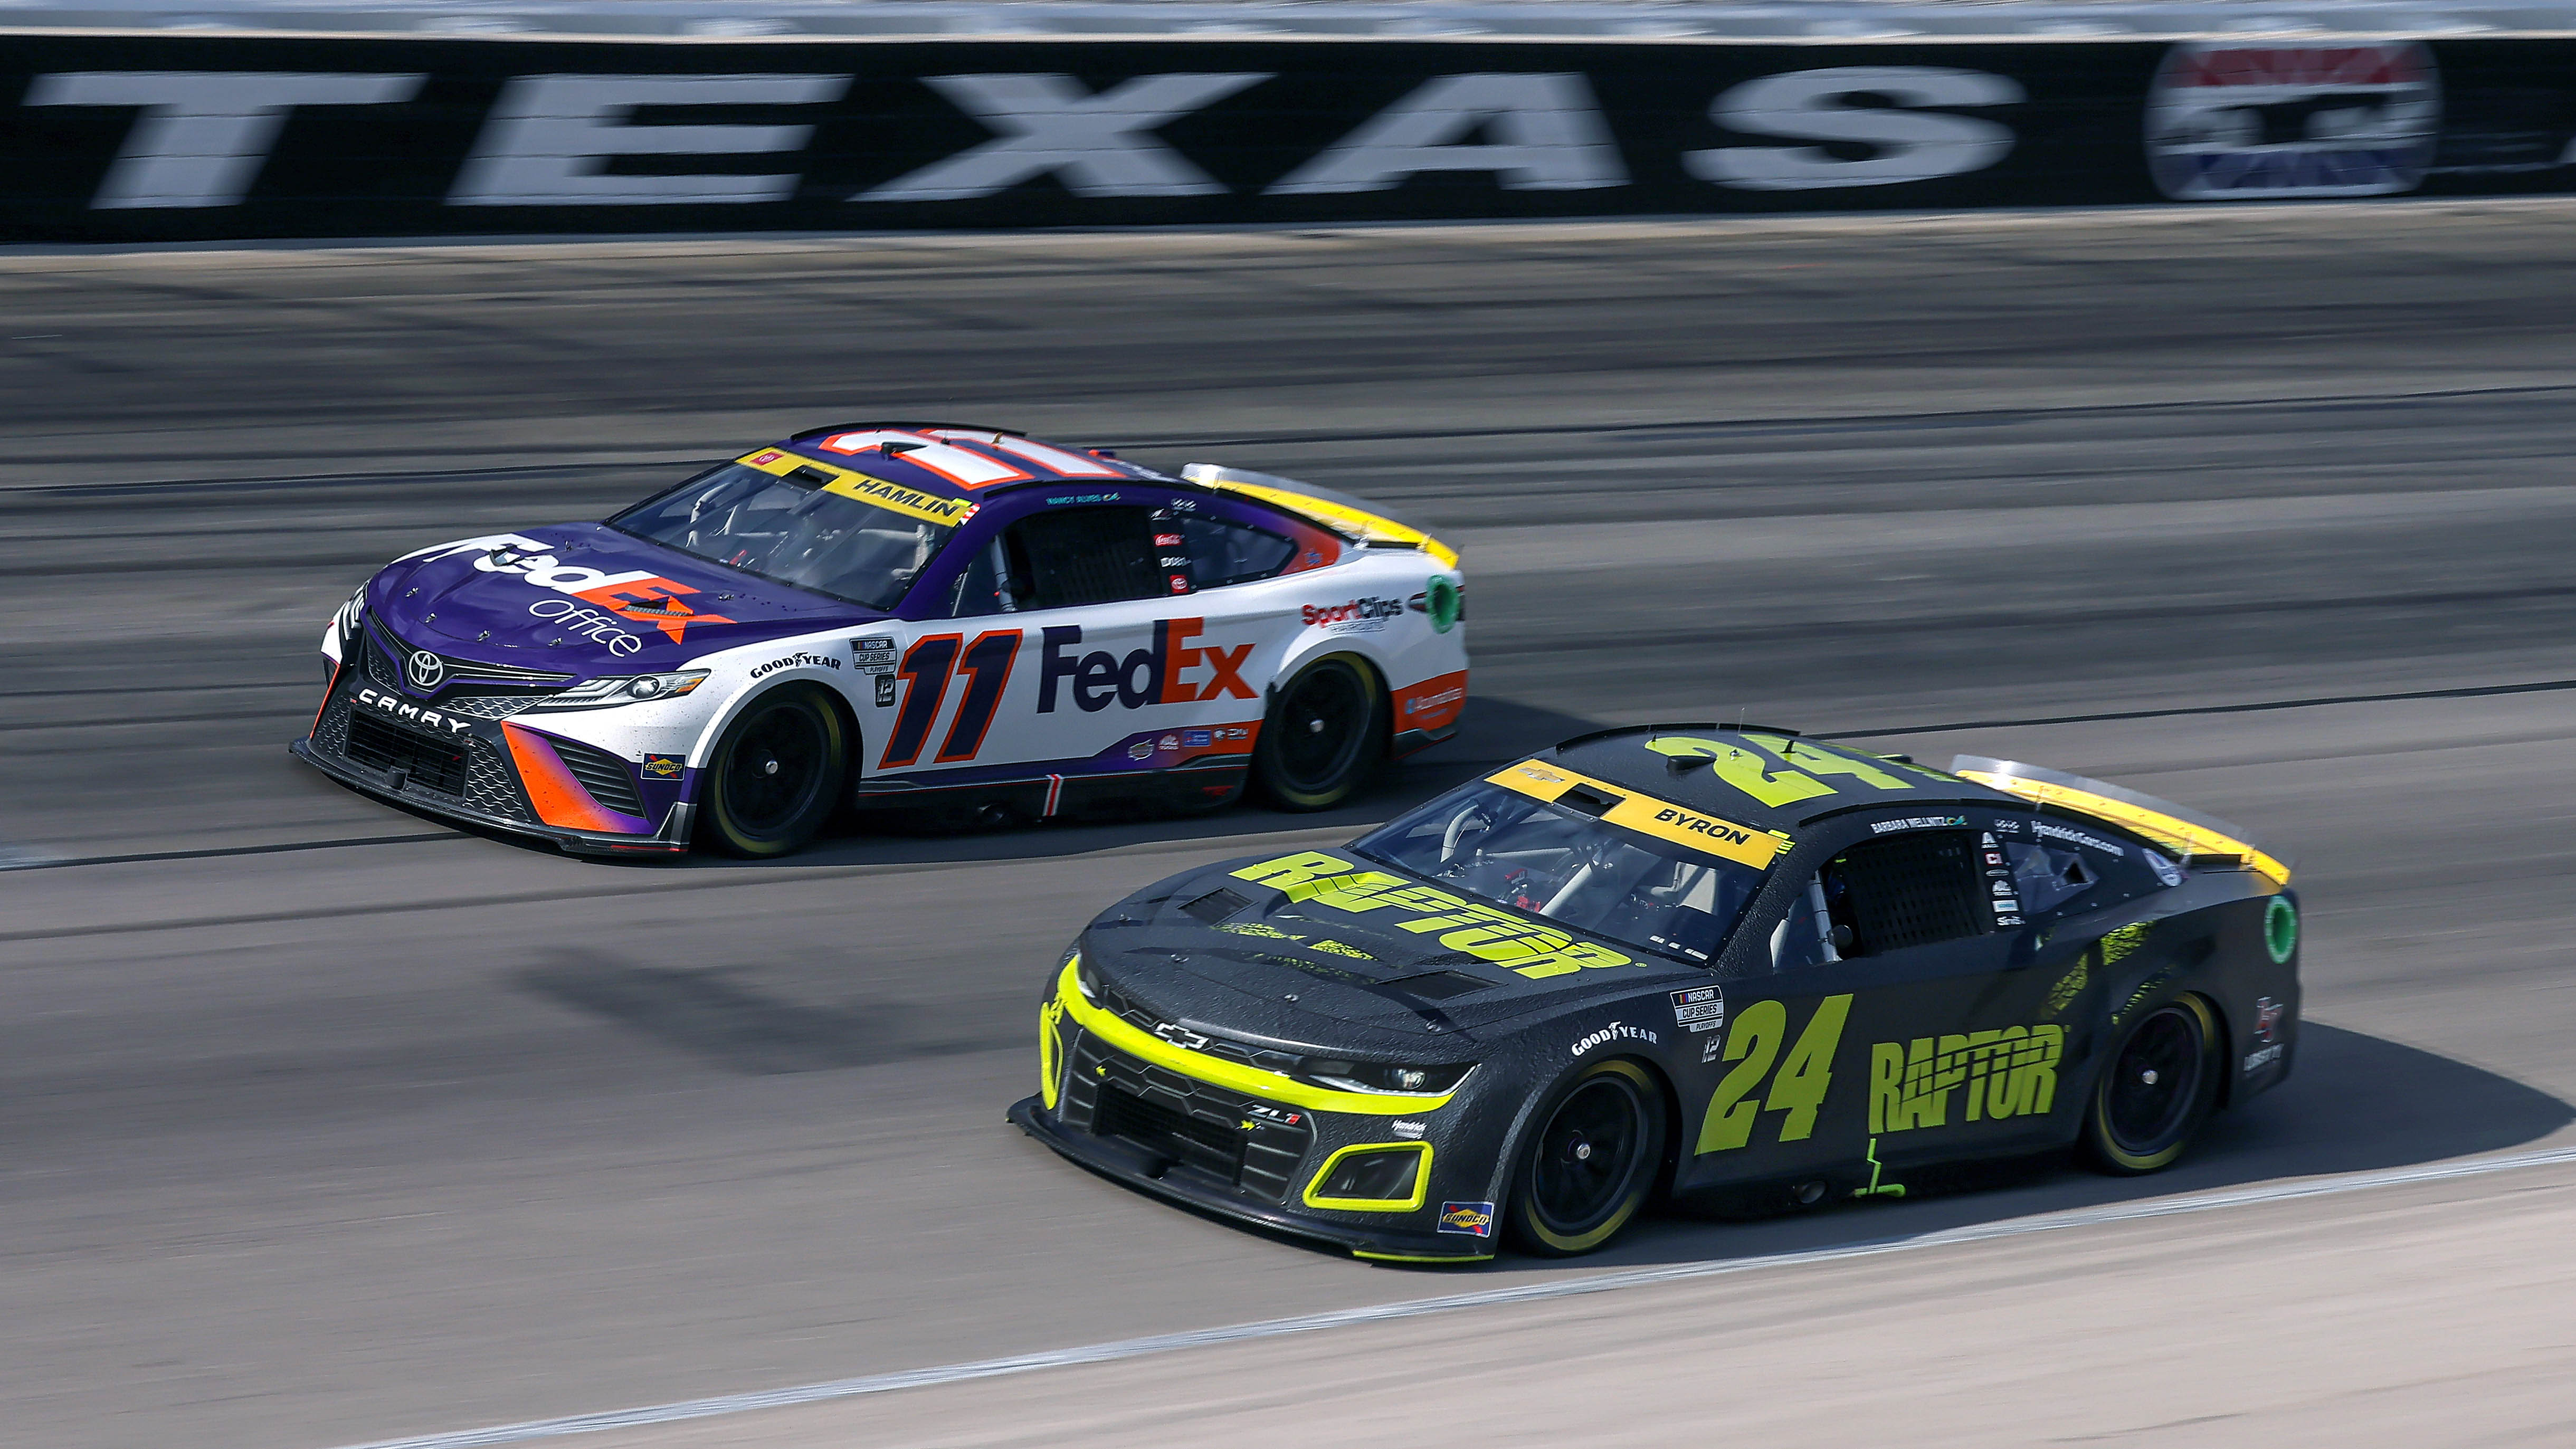 How to watch NASCAR at Texas Watch info, TV schedule, favorites